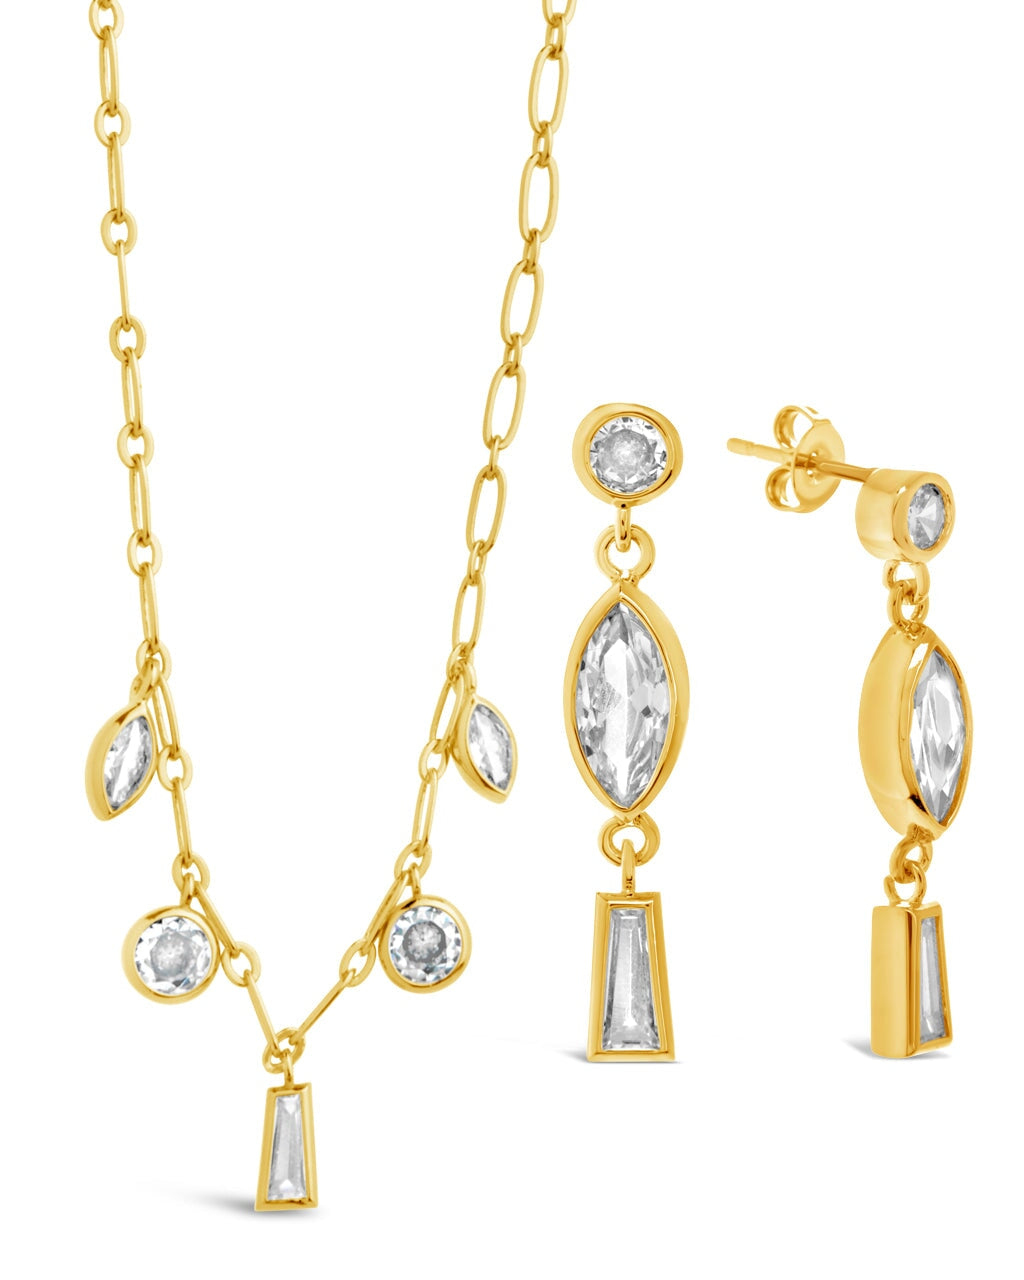 Suvi CZ Drop Earrings and Charm Necklace Set Bundles Sterling Forever Gold 